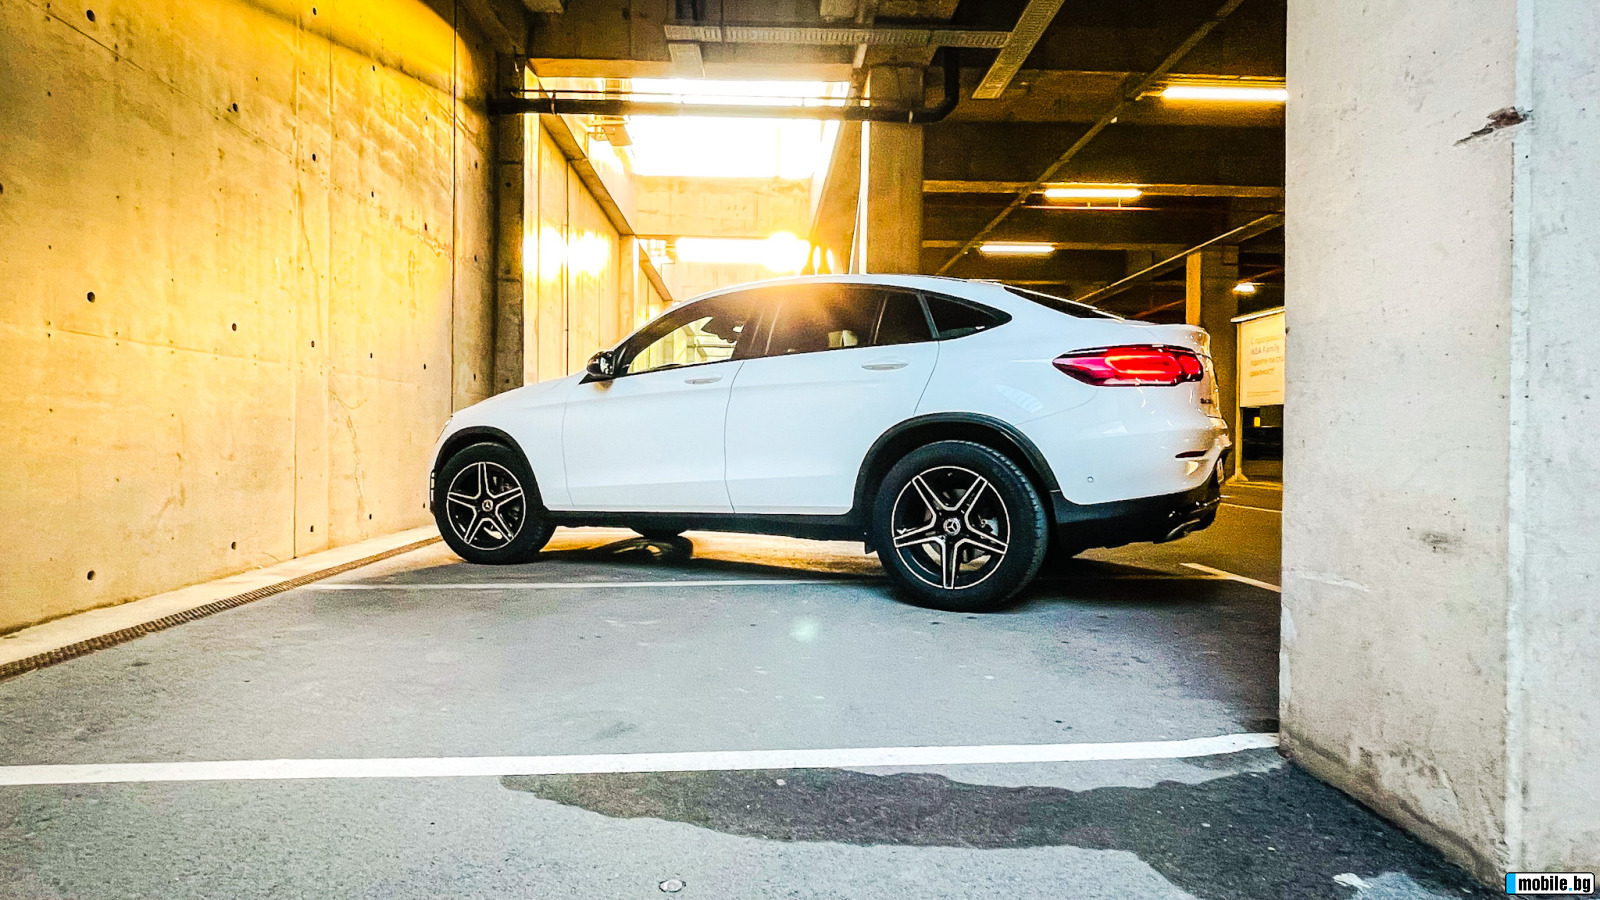 Mercedes-Benz GLC 220 COUPE, AMG, 4MATIC,  | Mobile.bg   6